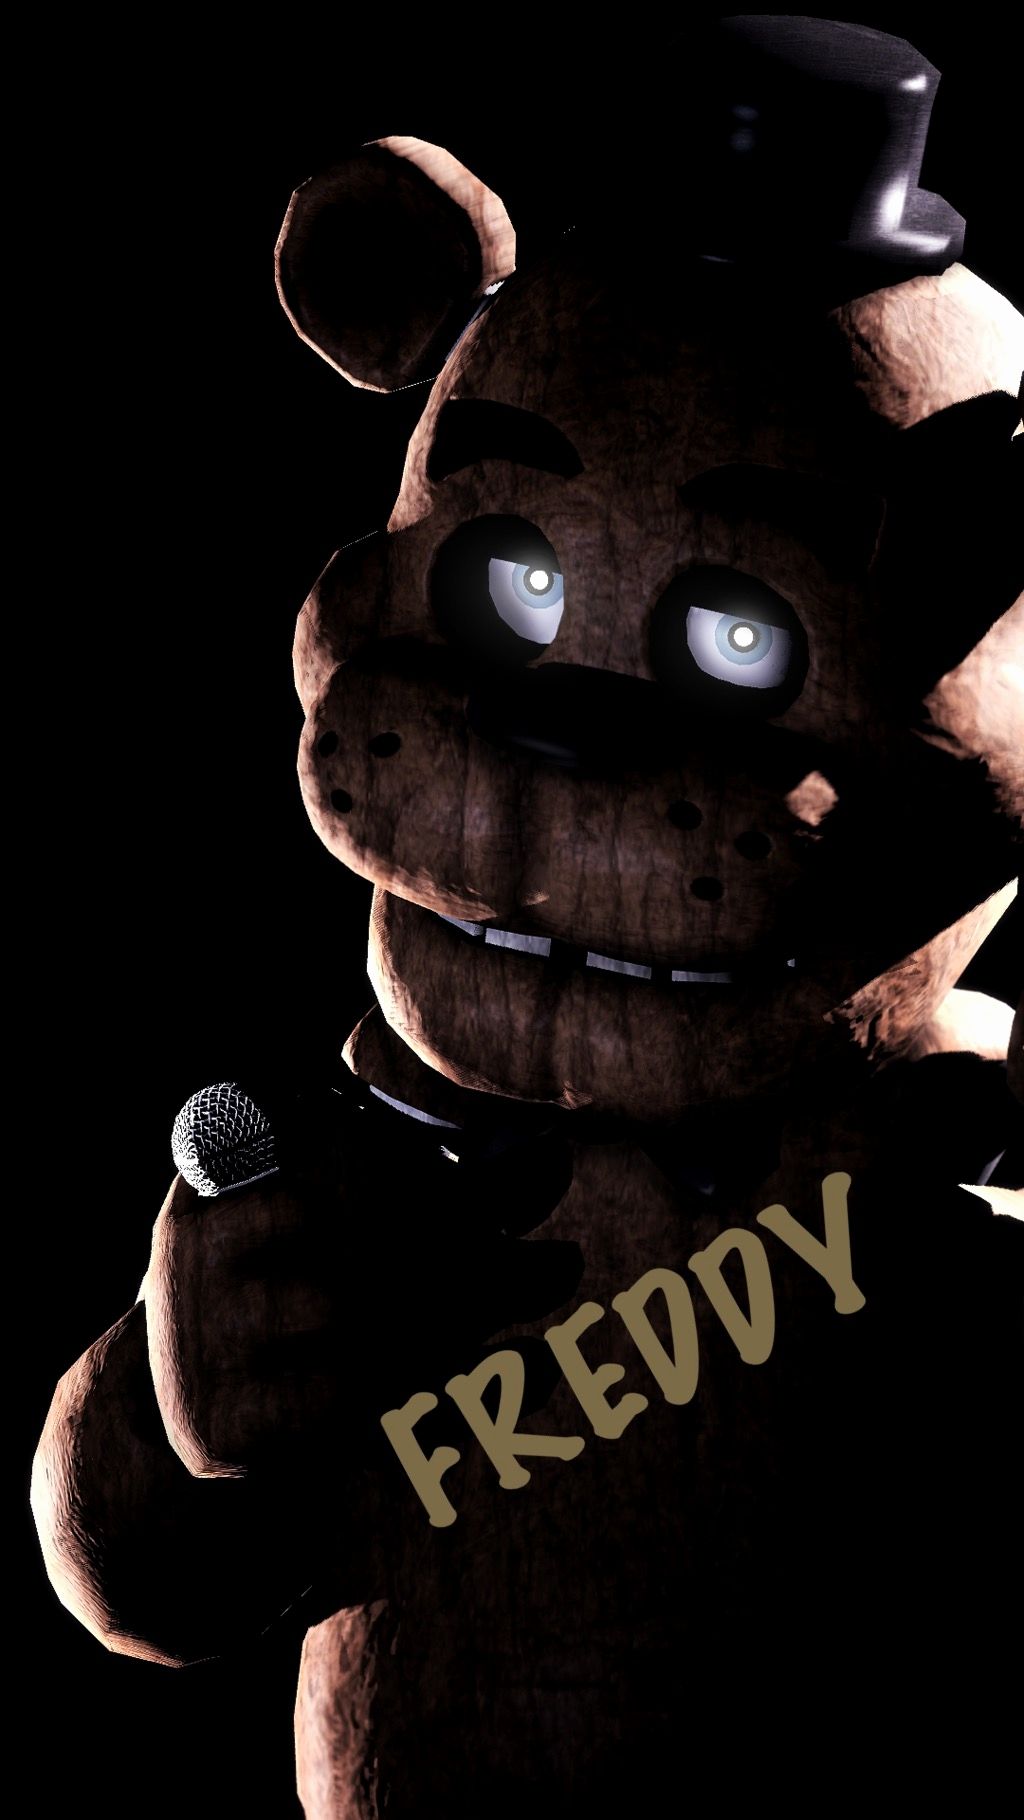 Luxury Five Nights at Freddy's Live Wallpaper 2019